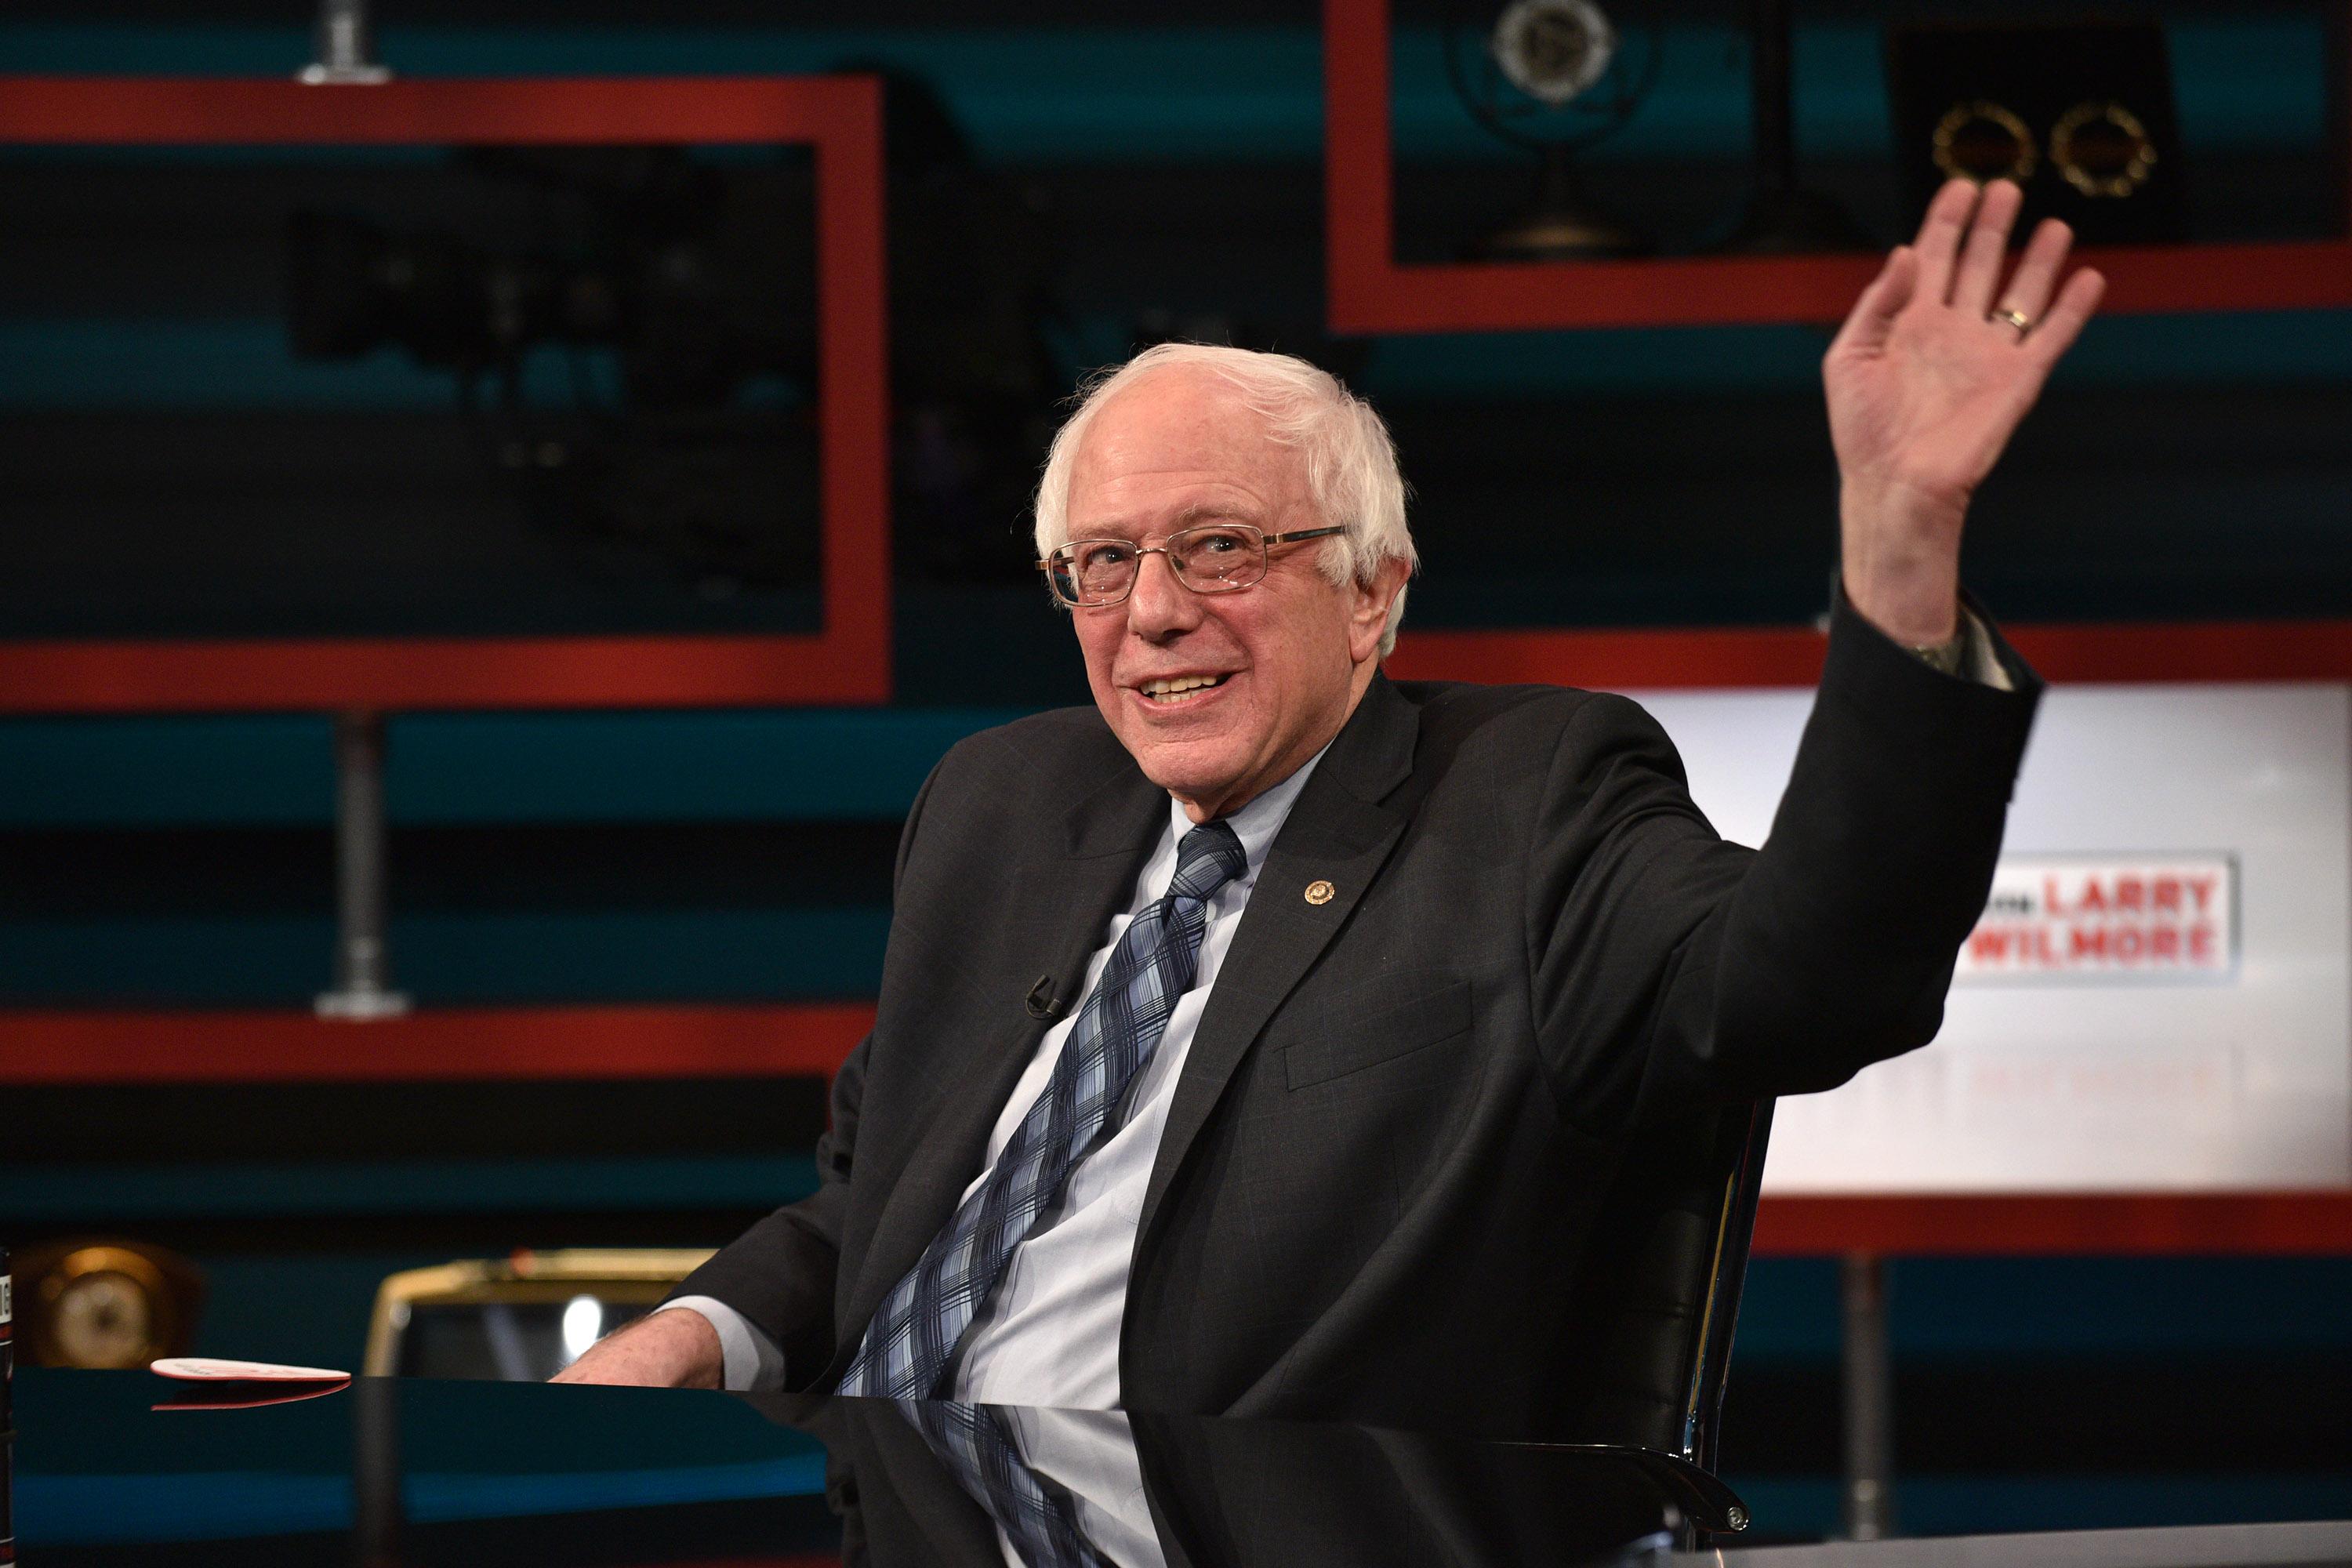 Senator Bernie Sanders on Comedy Central's "The Nightly Show With Larry Wilmore" on January 5, 2016. (Bryan Bedder - Getty Images)